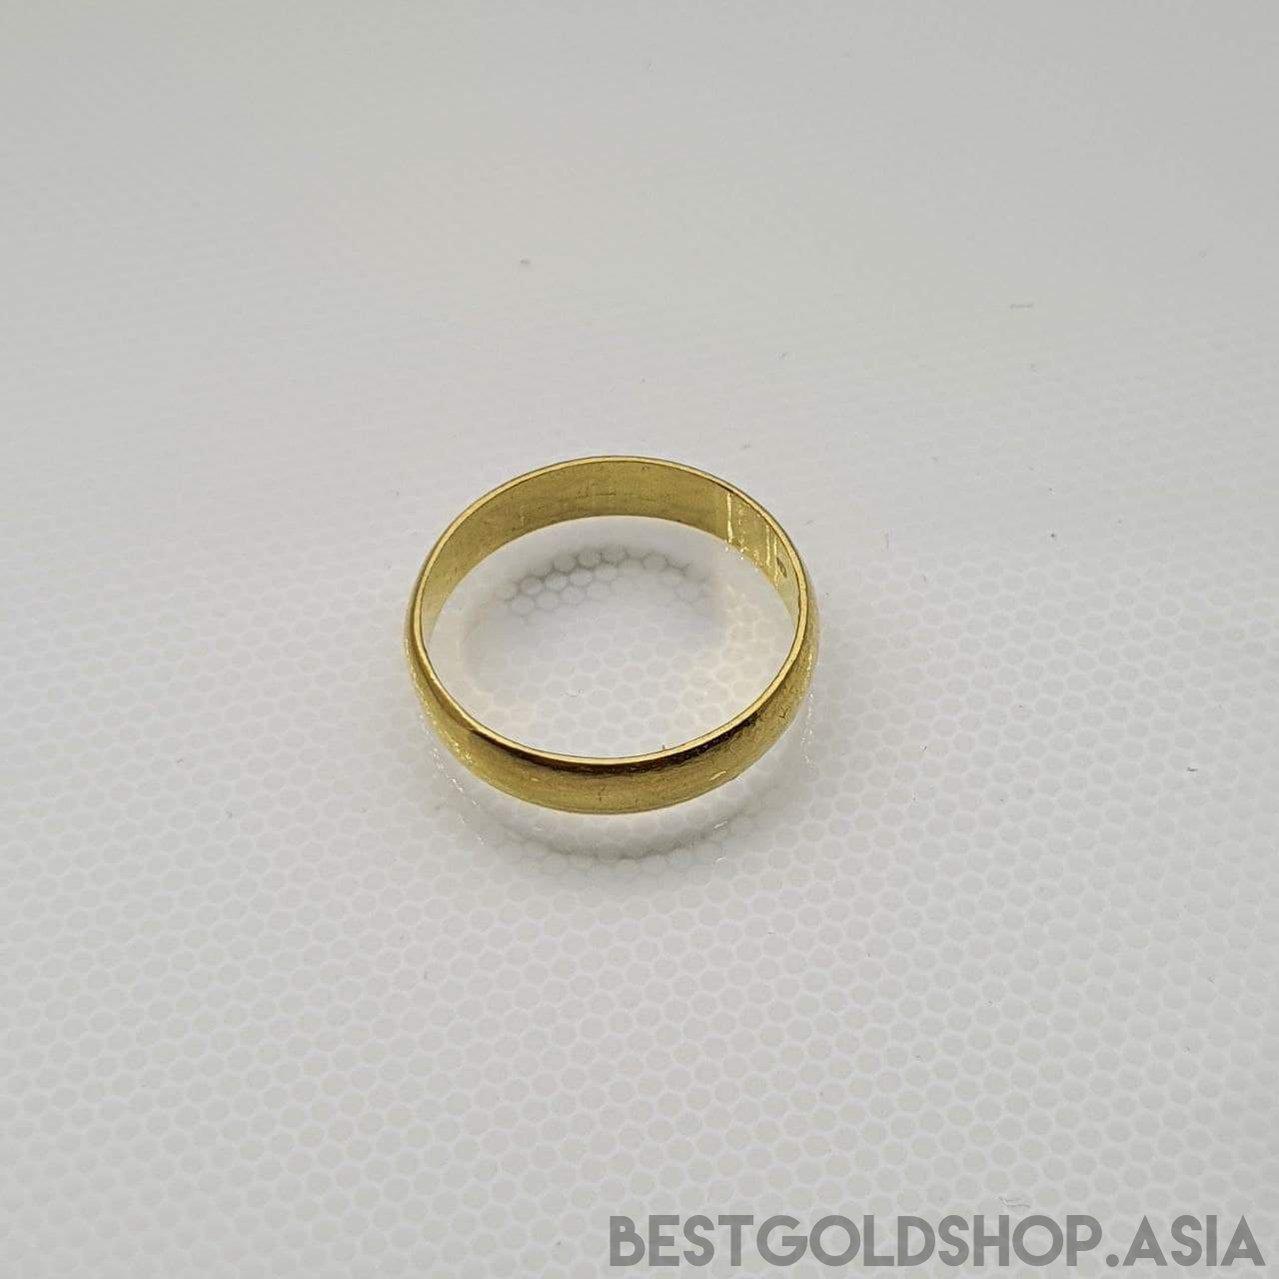 22k / 916 Gold Simple Ring 3-Rings-Best Gold Shop